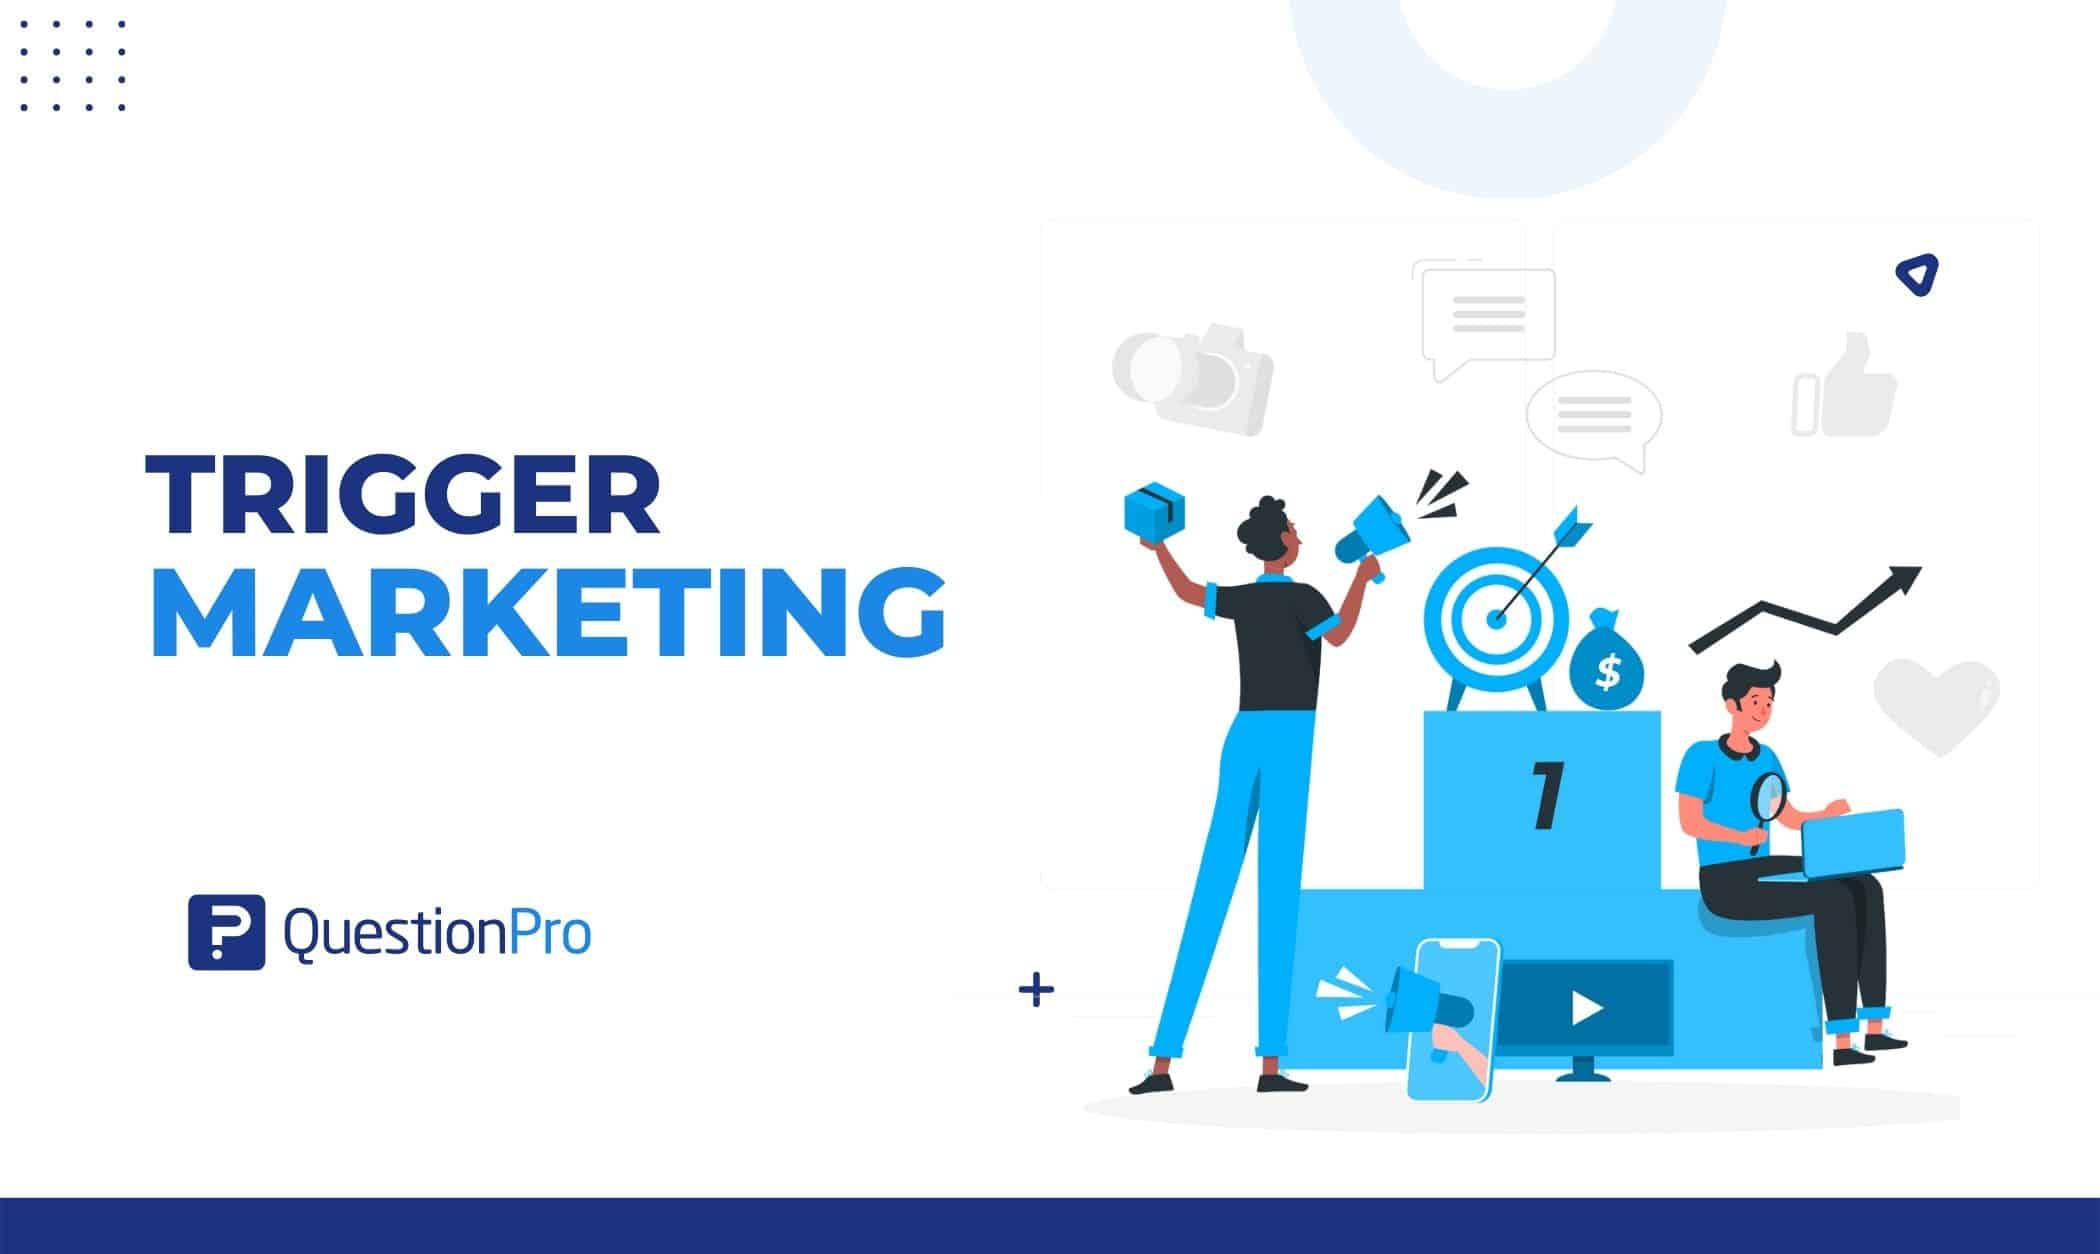 Trigger marketing gives you a way to send relevant, personalized messages to your contacts at the right time to reach your lead or customer.